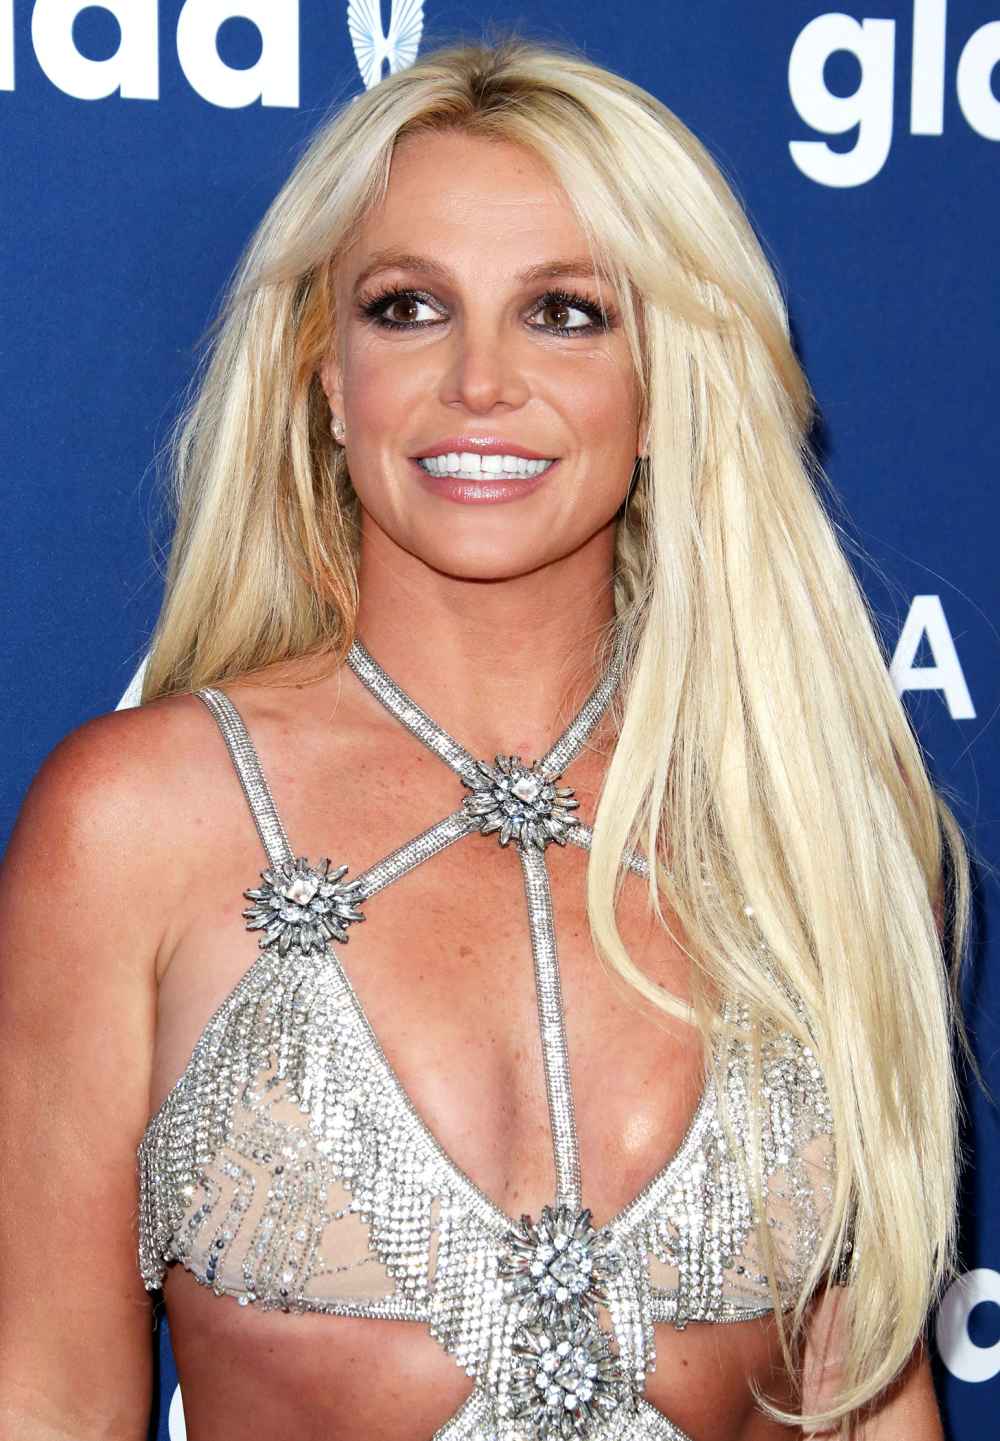 Britney Spears Clears Up Confusion About Her Missing Tattoo